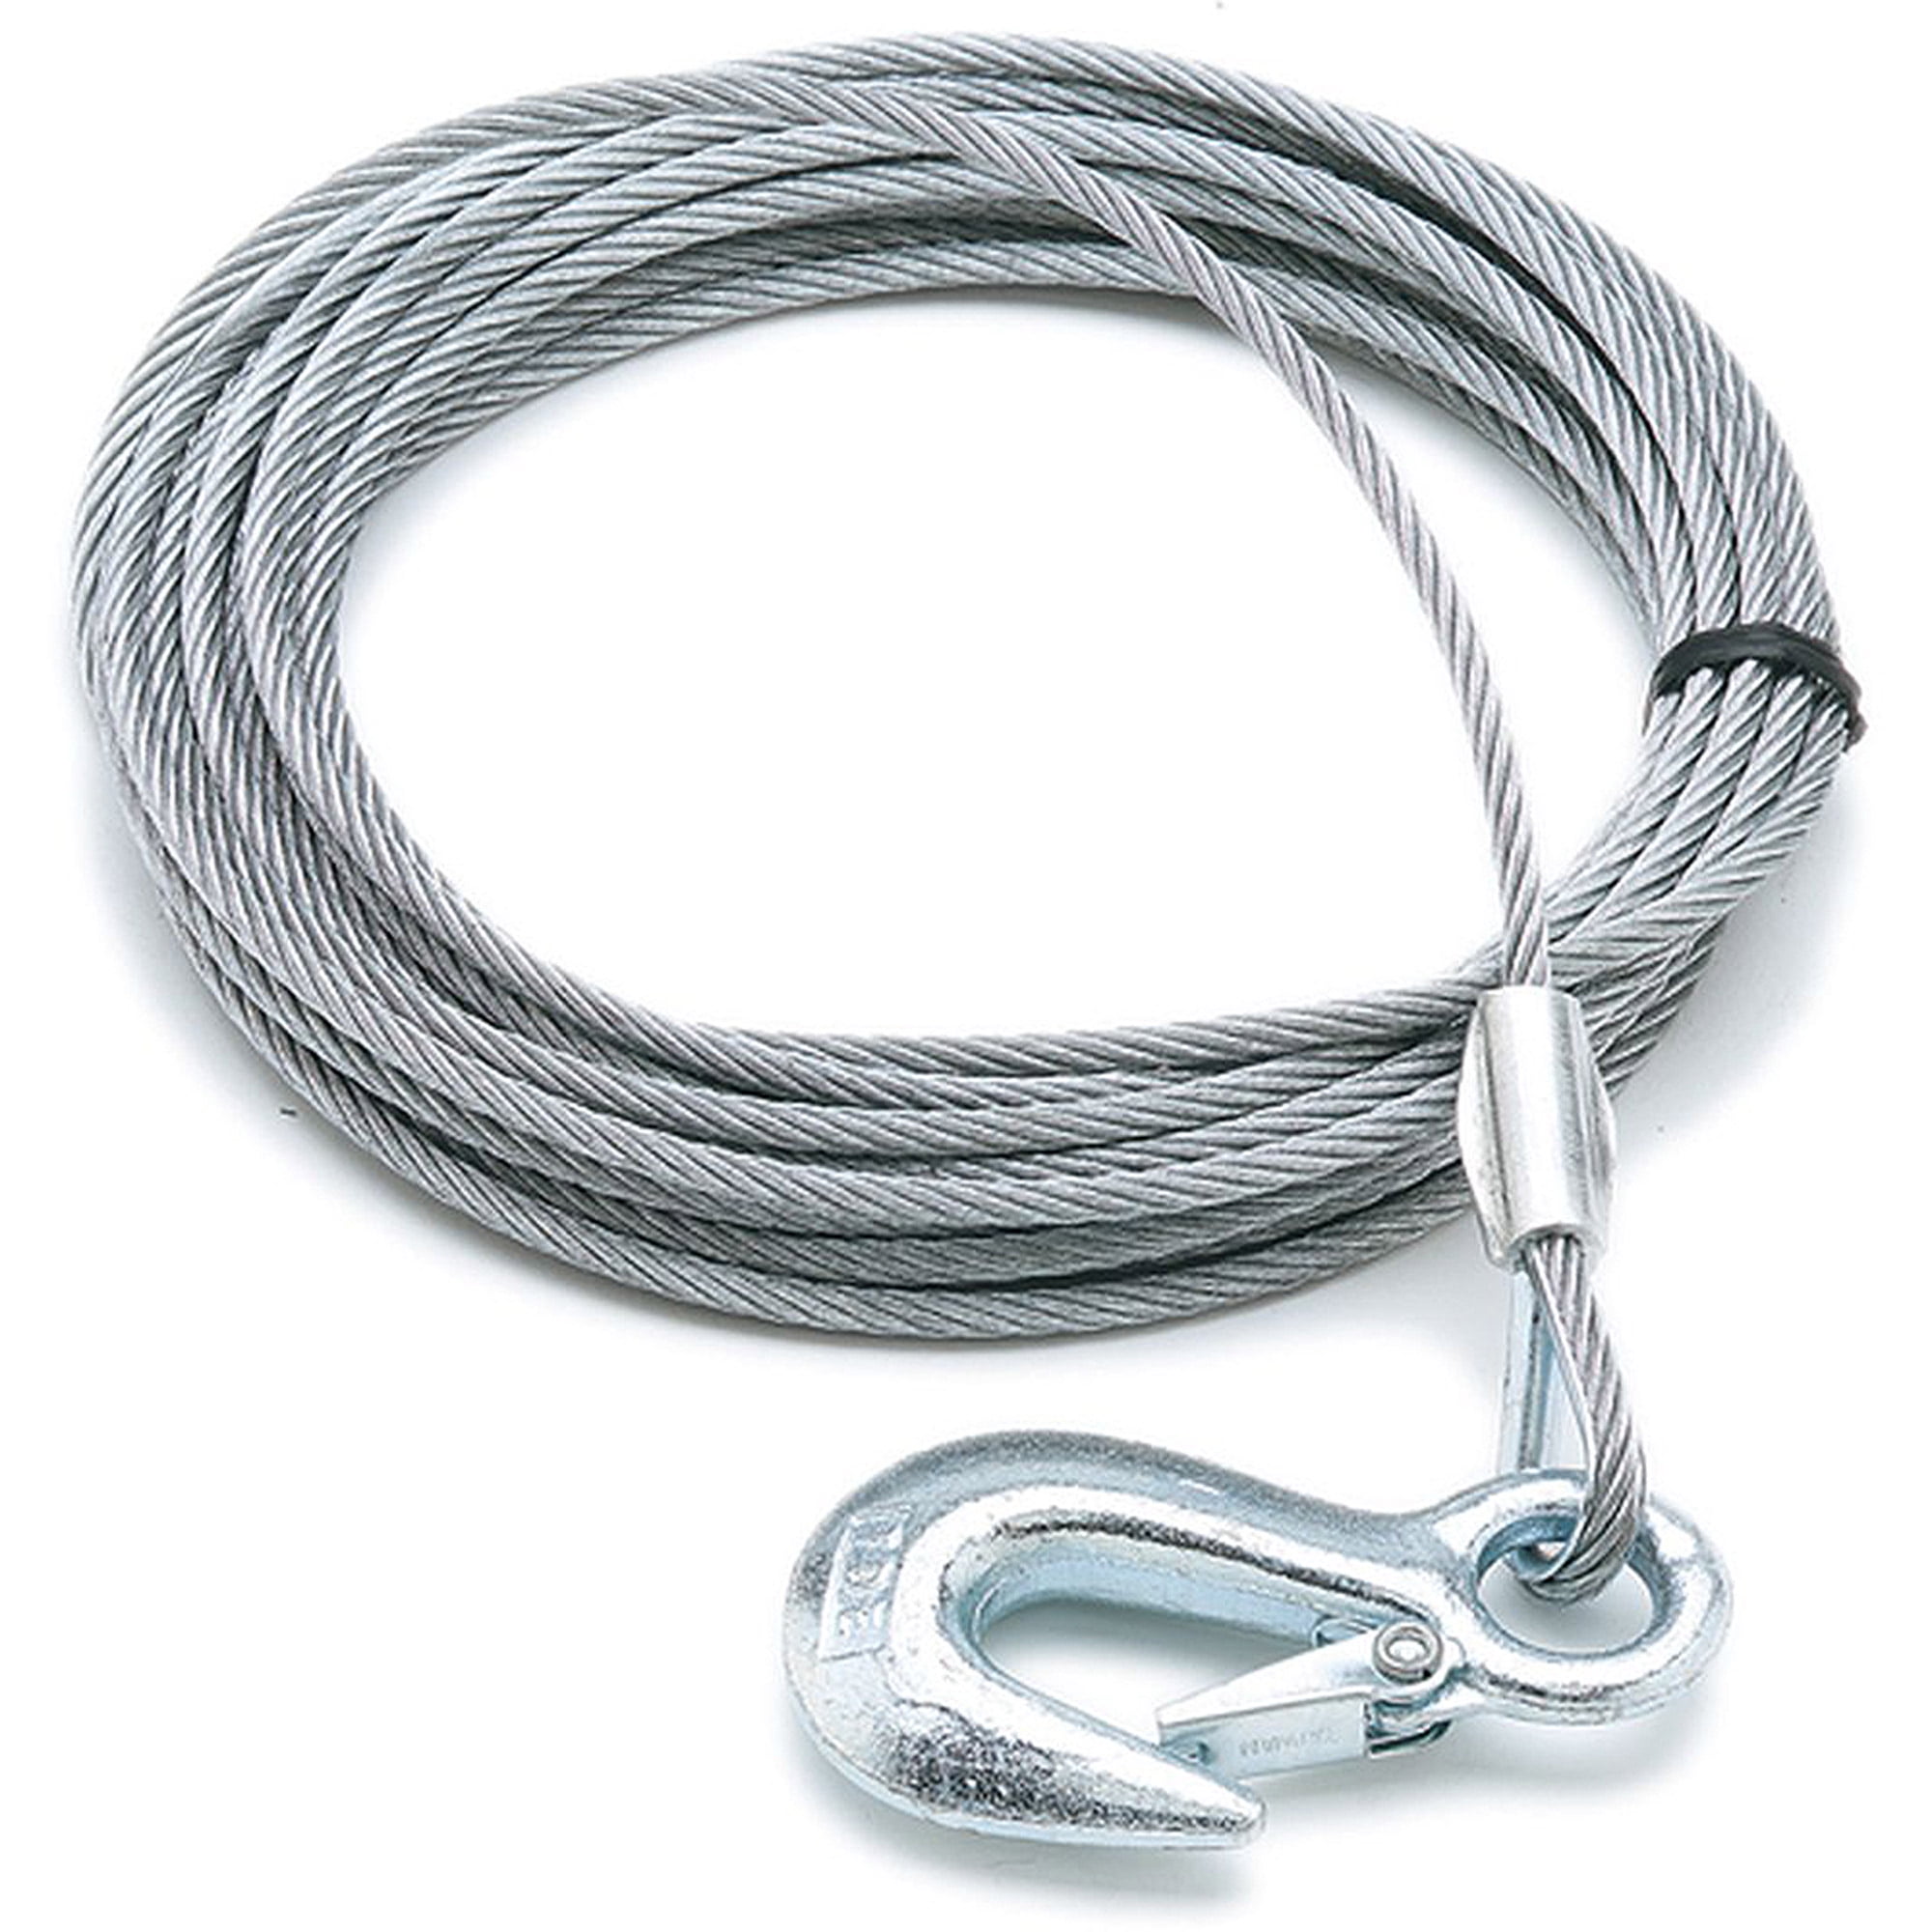 POWERWINCH CABLE 20' X 7/32" W/HOOK GALVANIZED 